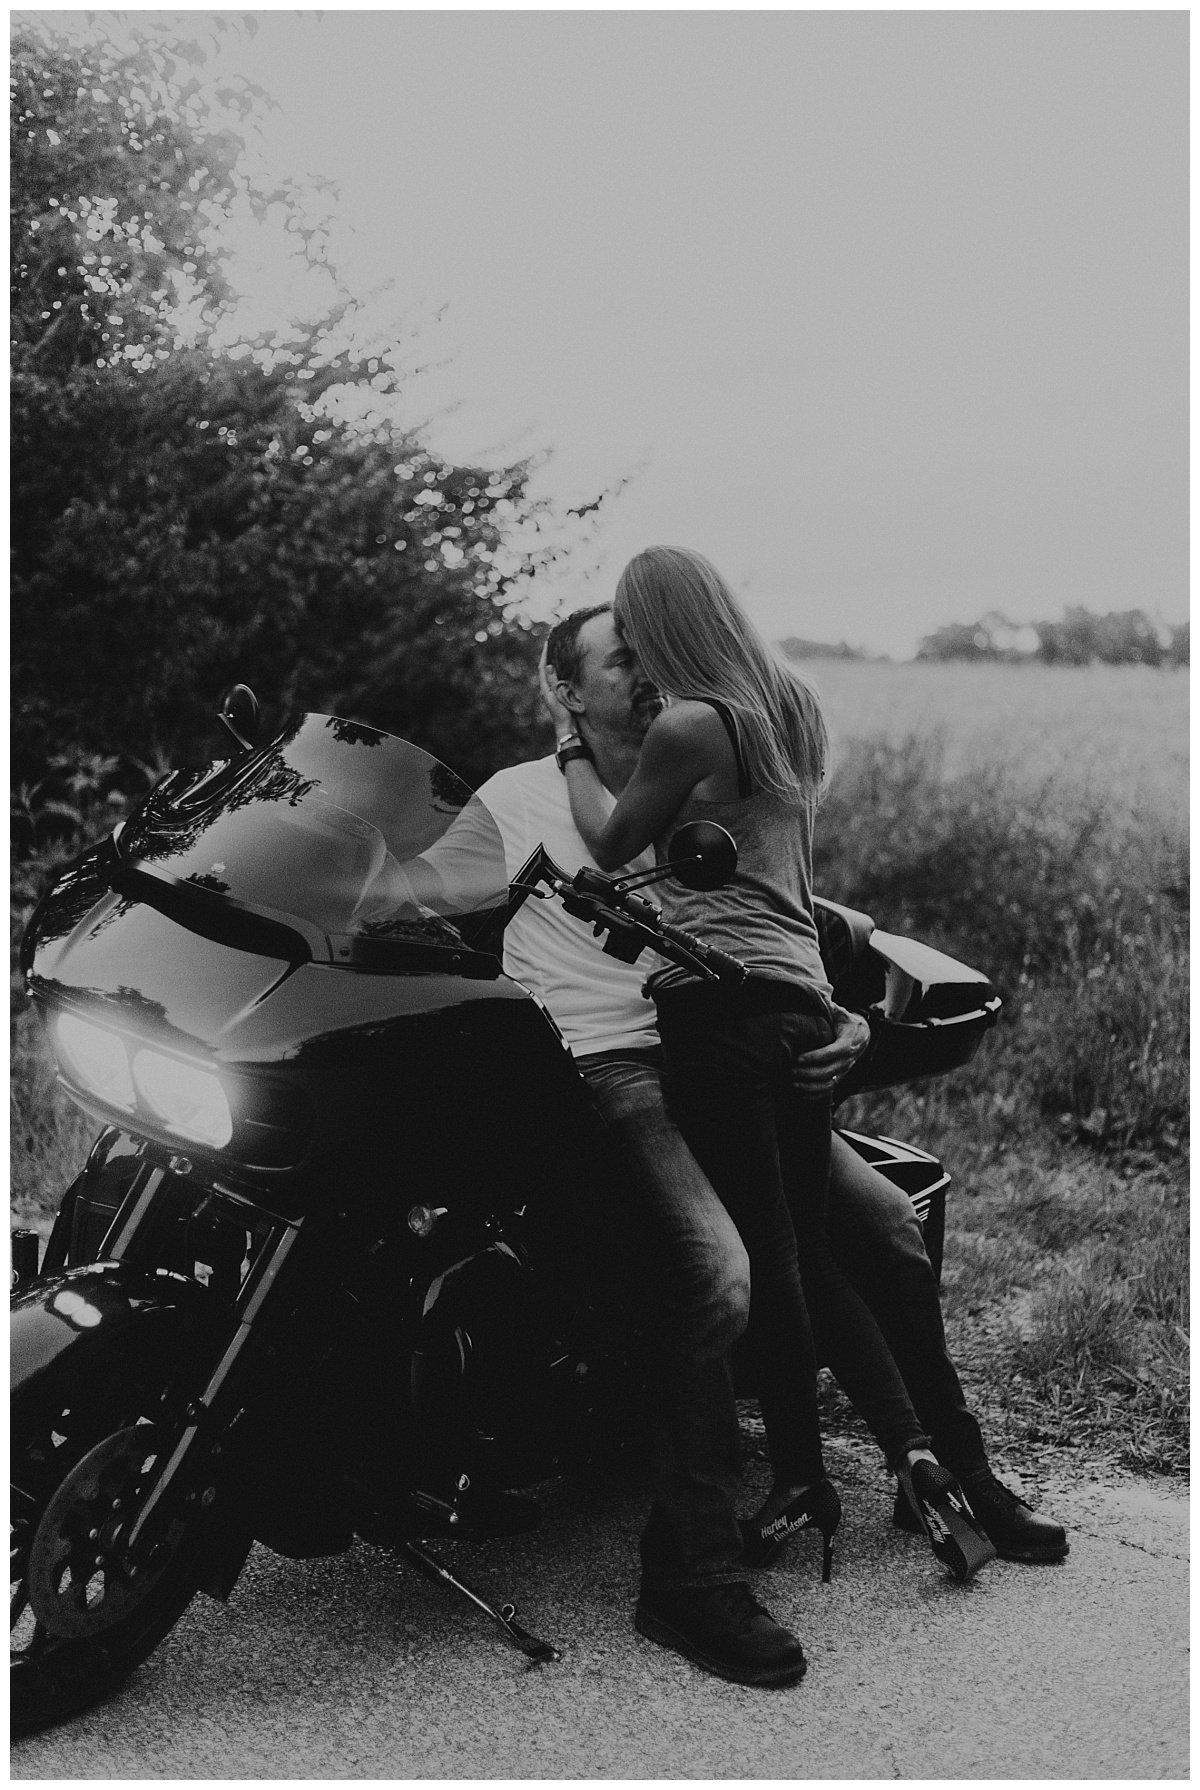 motorcycle+session+_+adventure+session+_+engagement+session+_+motorcycle+photos+_+lana+del+rey+_+ride+or+die+_+adventurous+couple+_+kansas+city+photographer+_+kansas+city+photography (17).jpeg